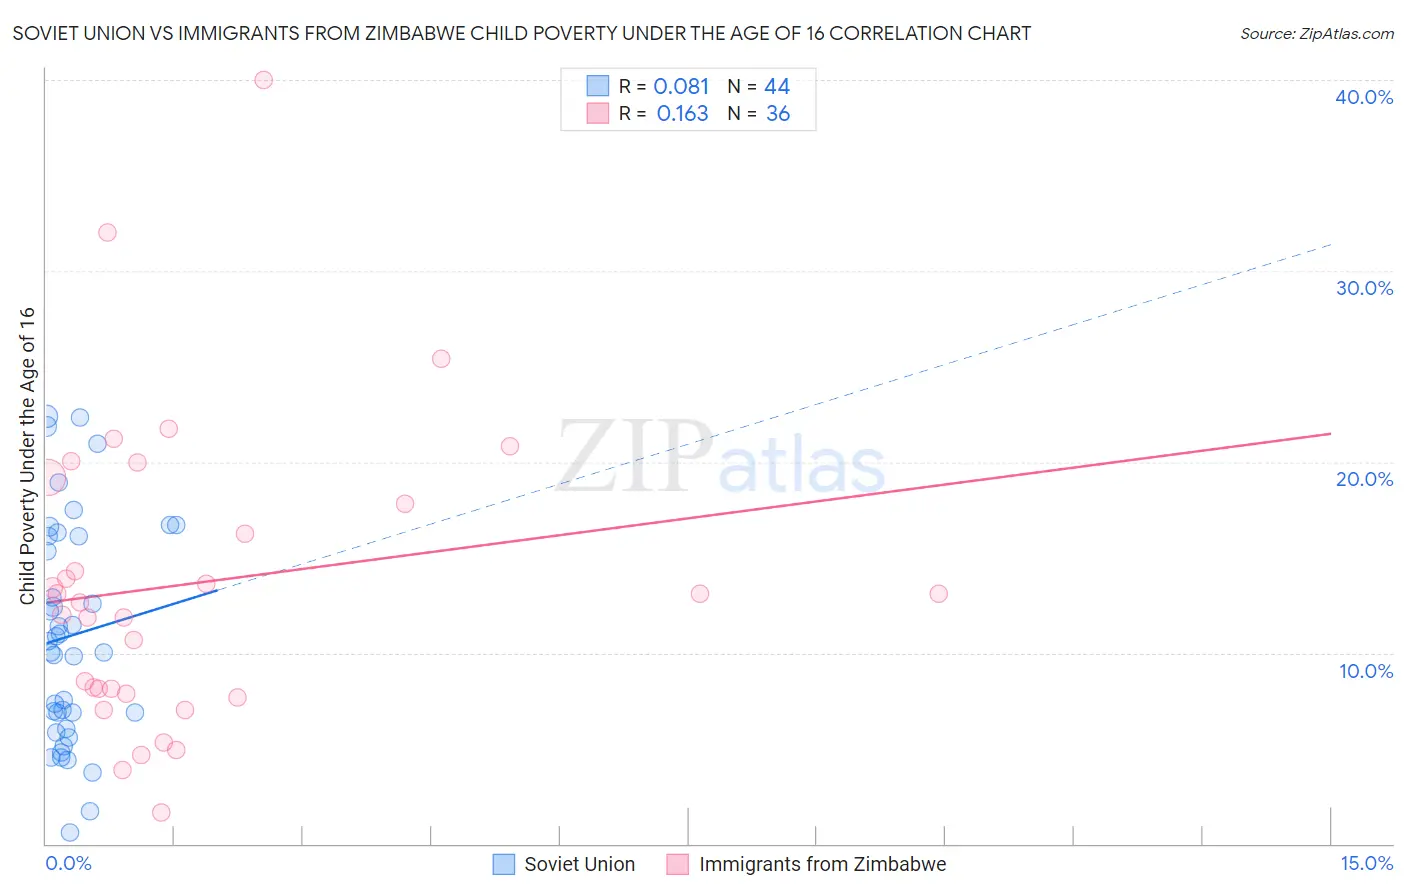 Soviet Union vs Immigrants from Zimbabwe Child Poverty Under the Age of 16